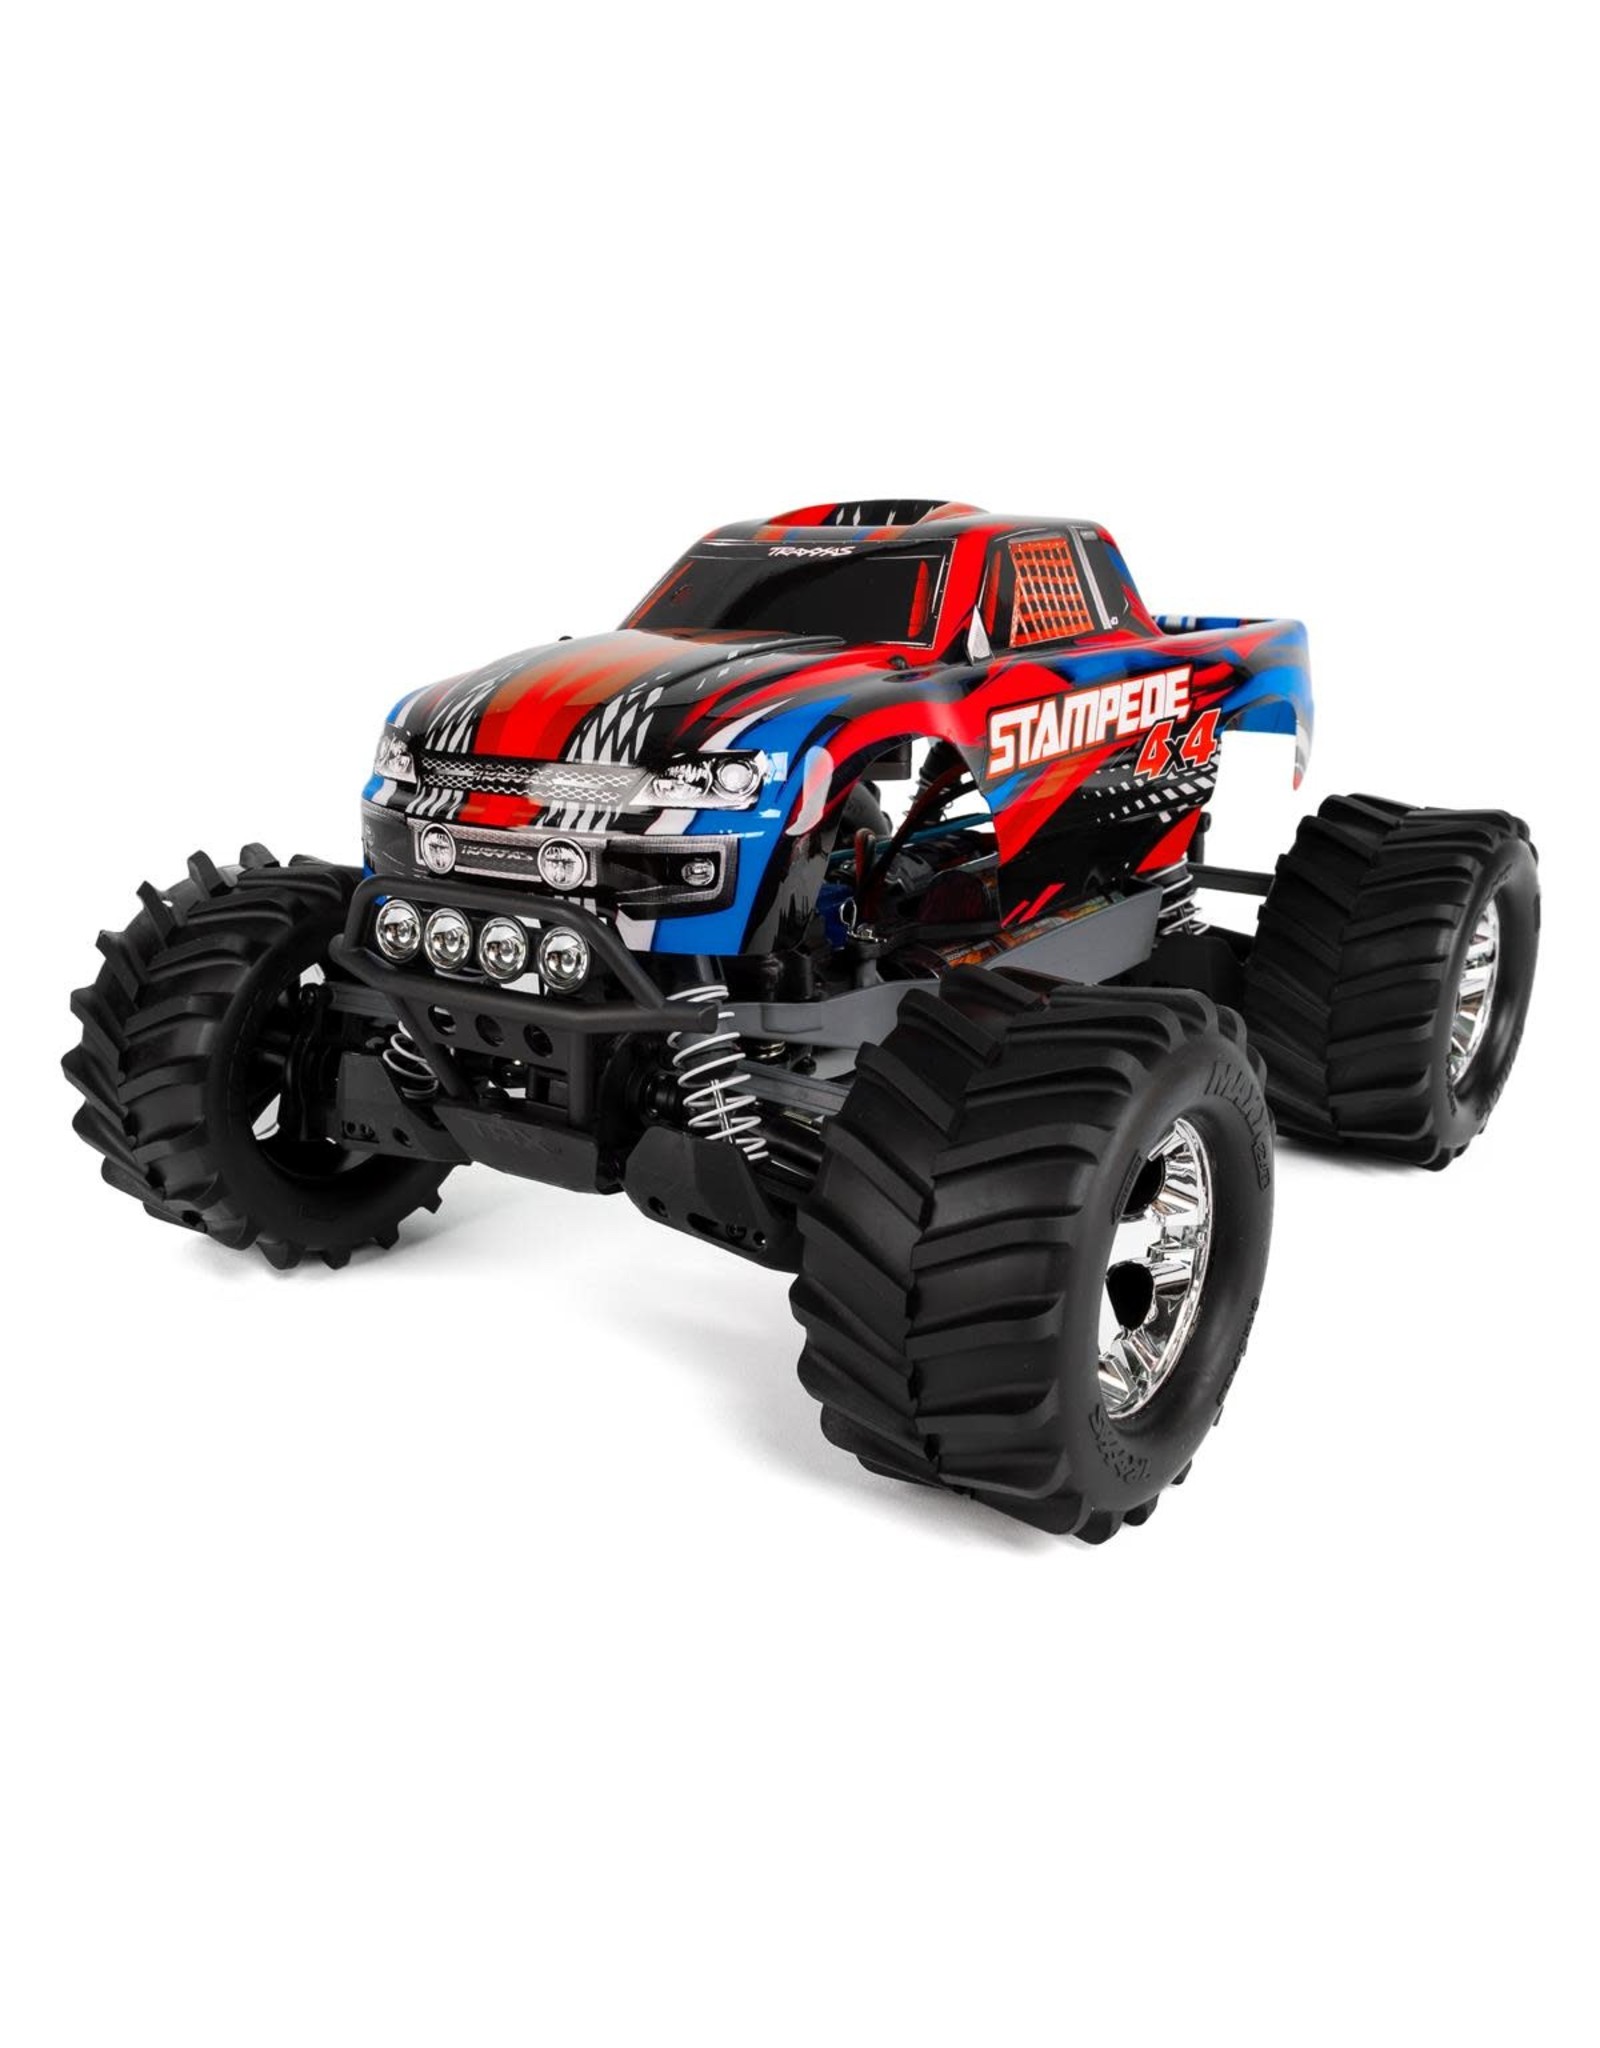 Traxxas Traxxas Stampede 4X4 LCG 1/10 RTR Monster Truck (Red) w/LED Lights, TQ 2.4GHz Radio, Battery & DC Charge